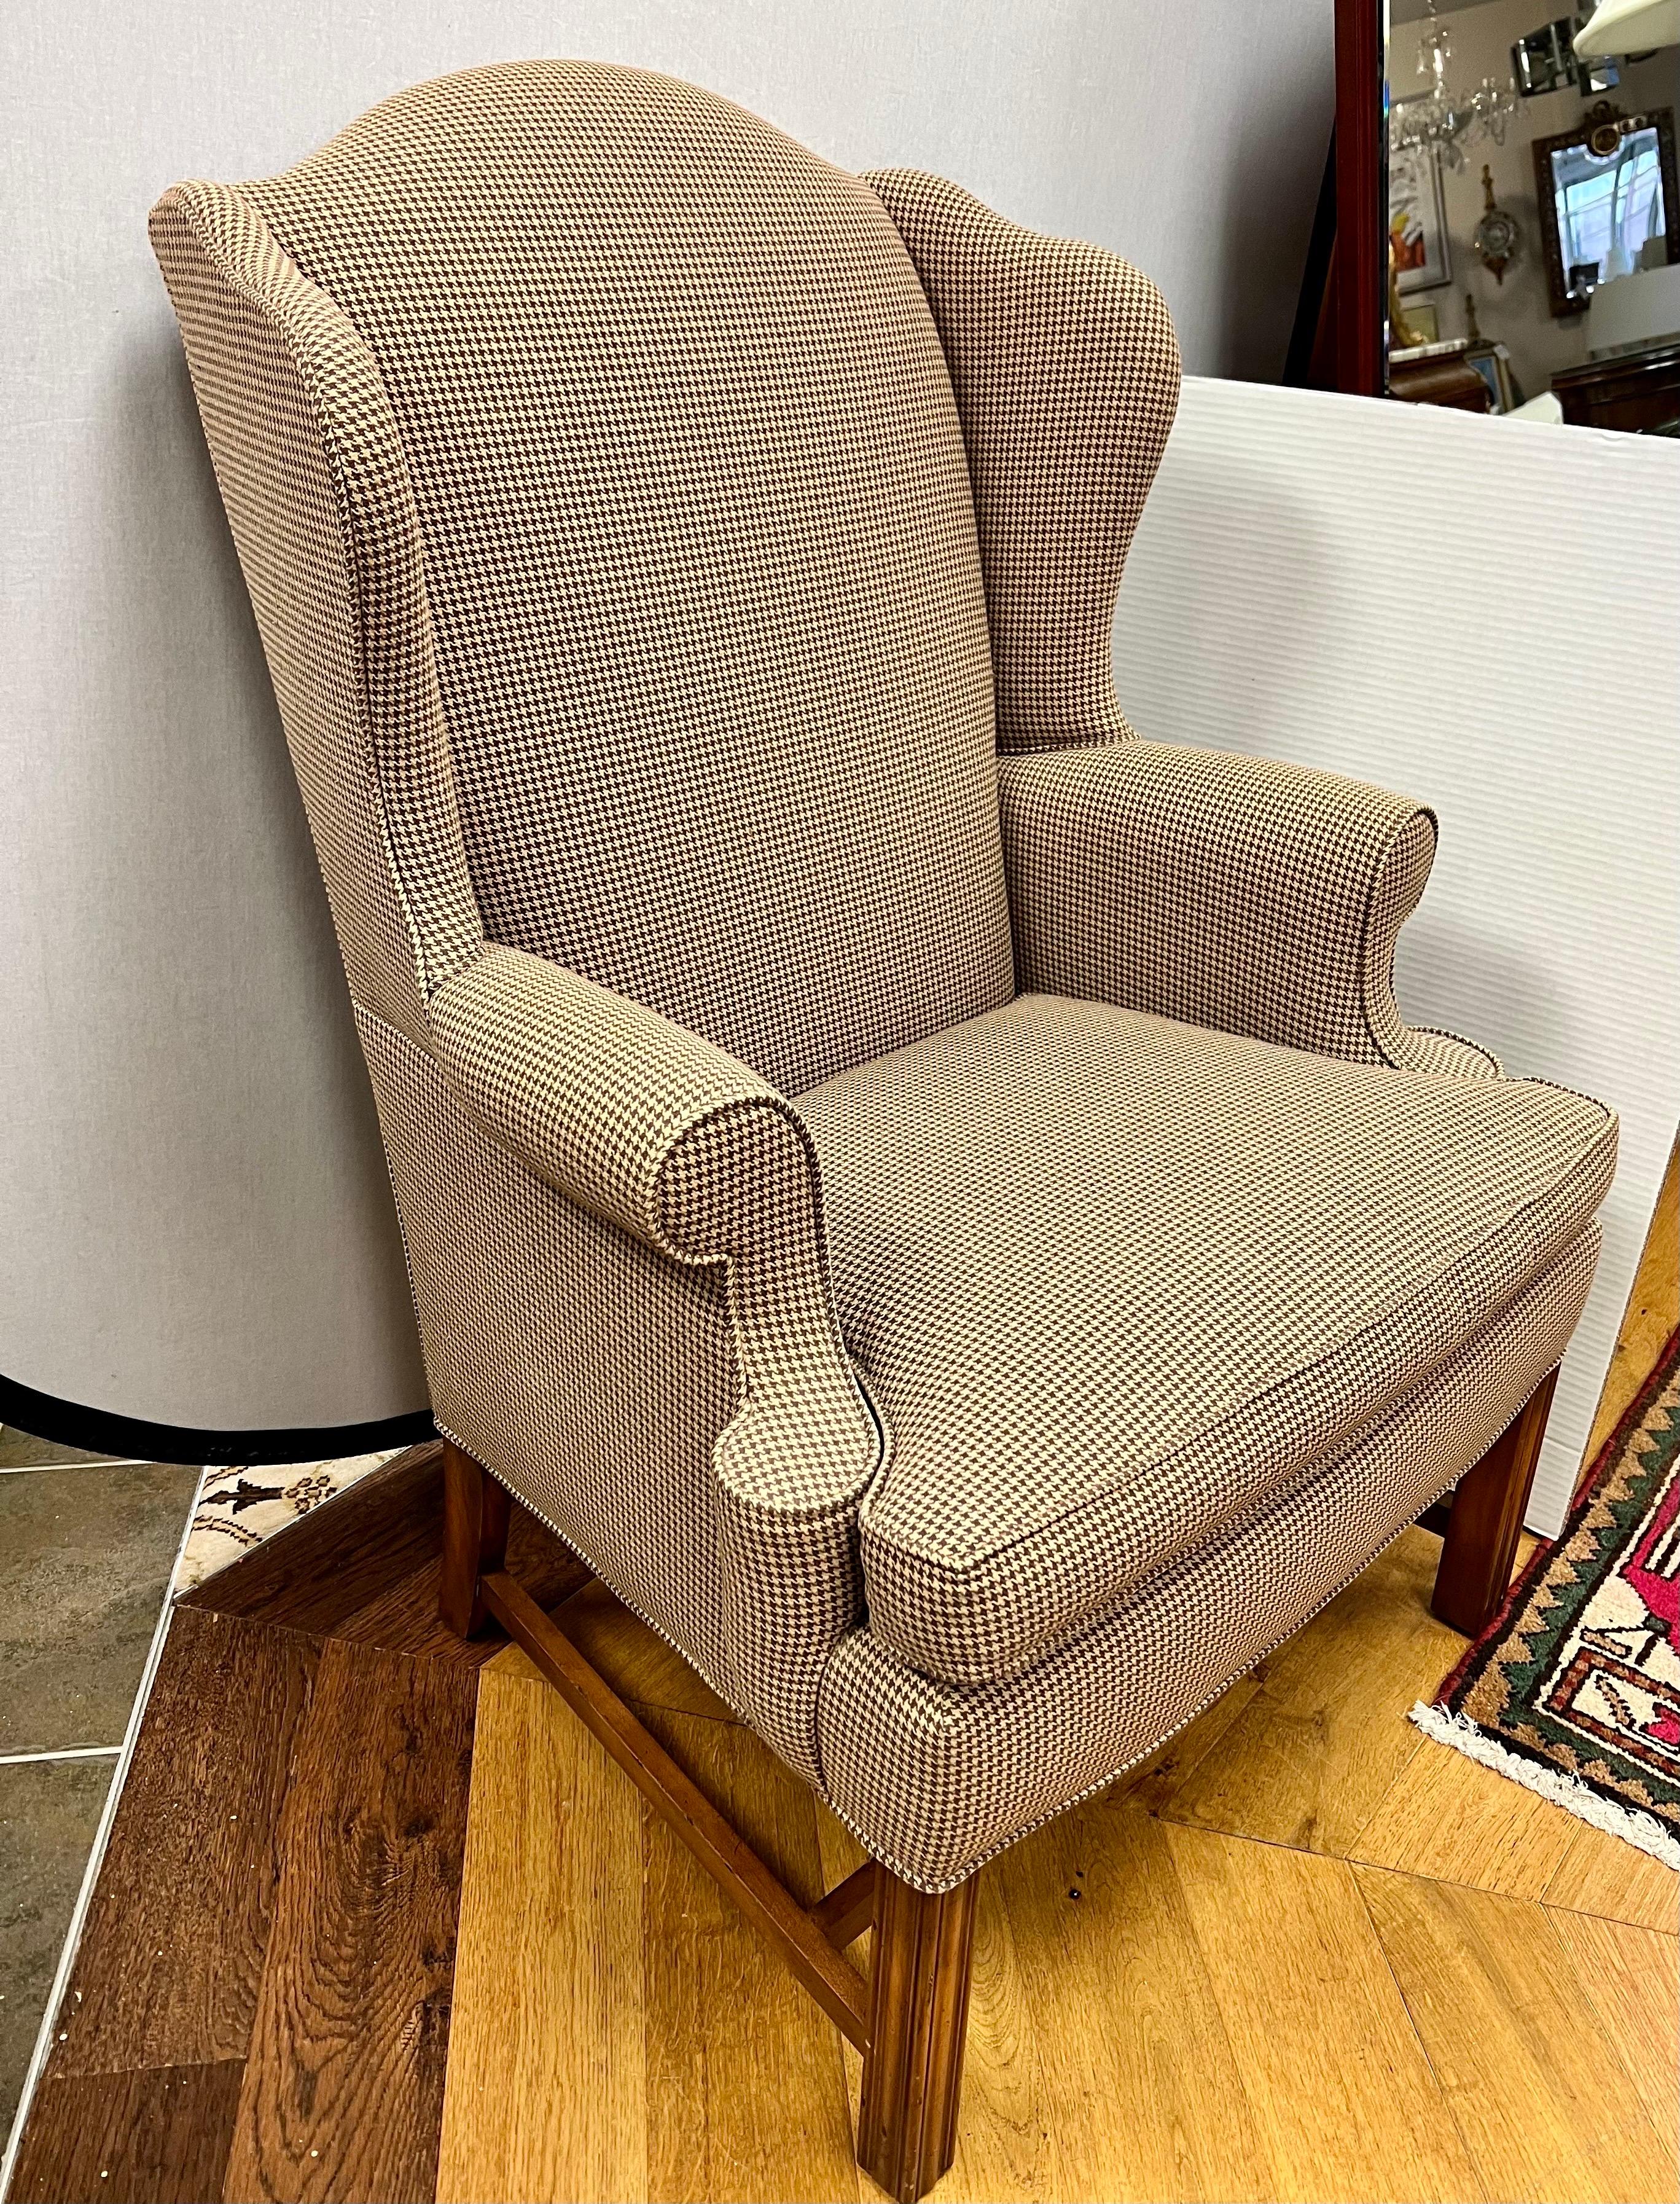 Classic wingback upholstered reading chair with brown and beige houndstooth fabric and mahogany frame.